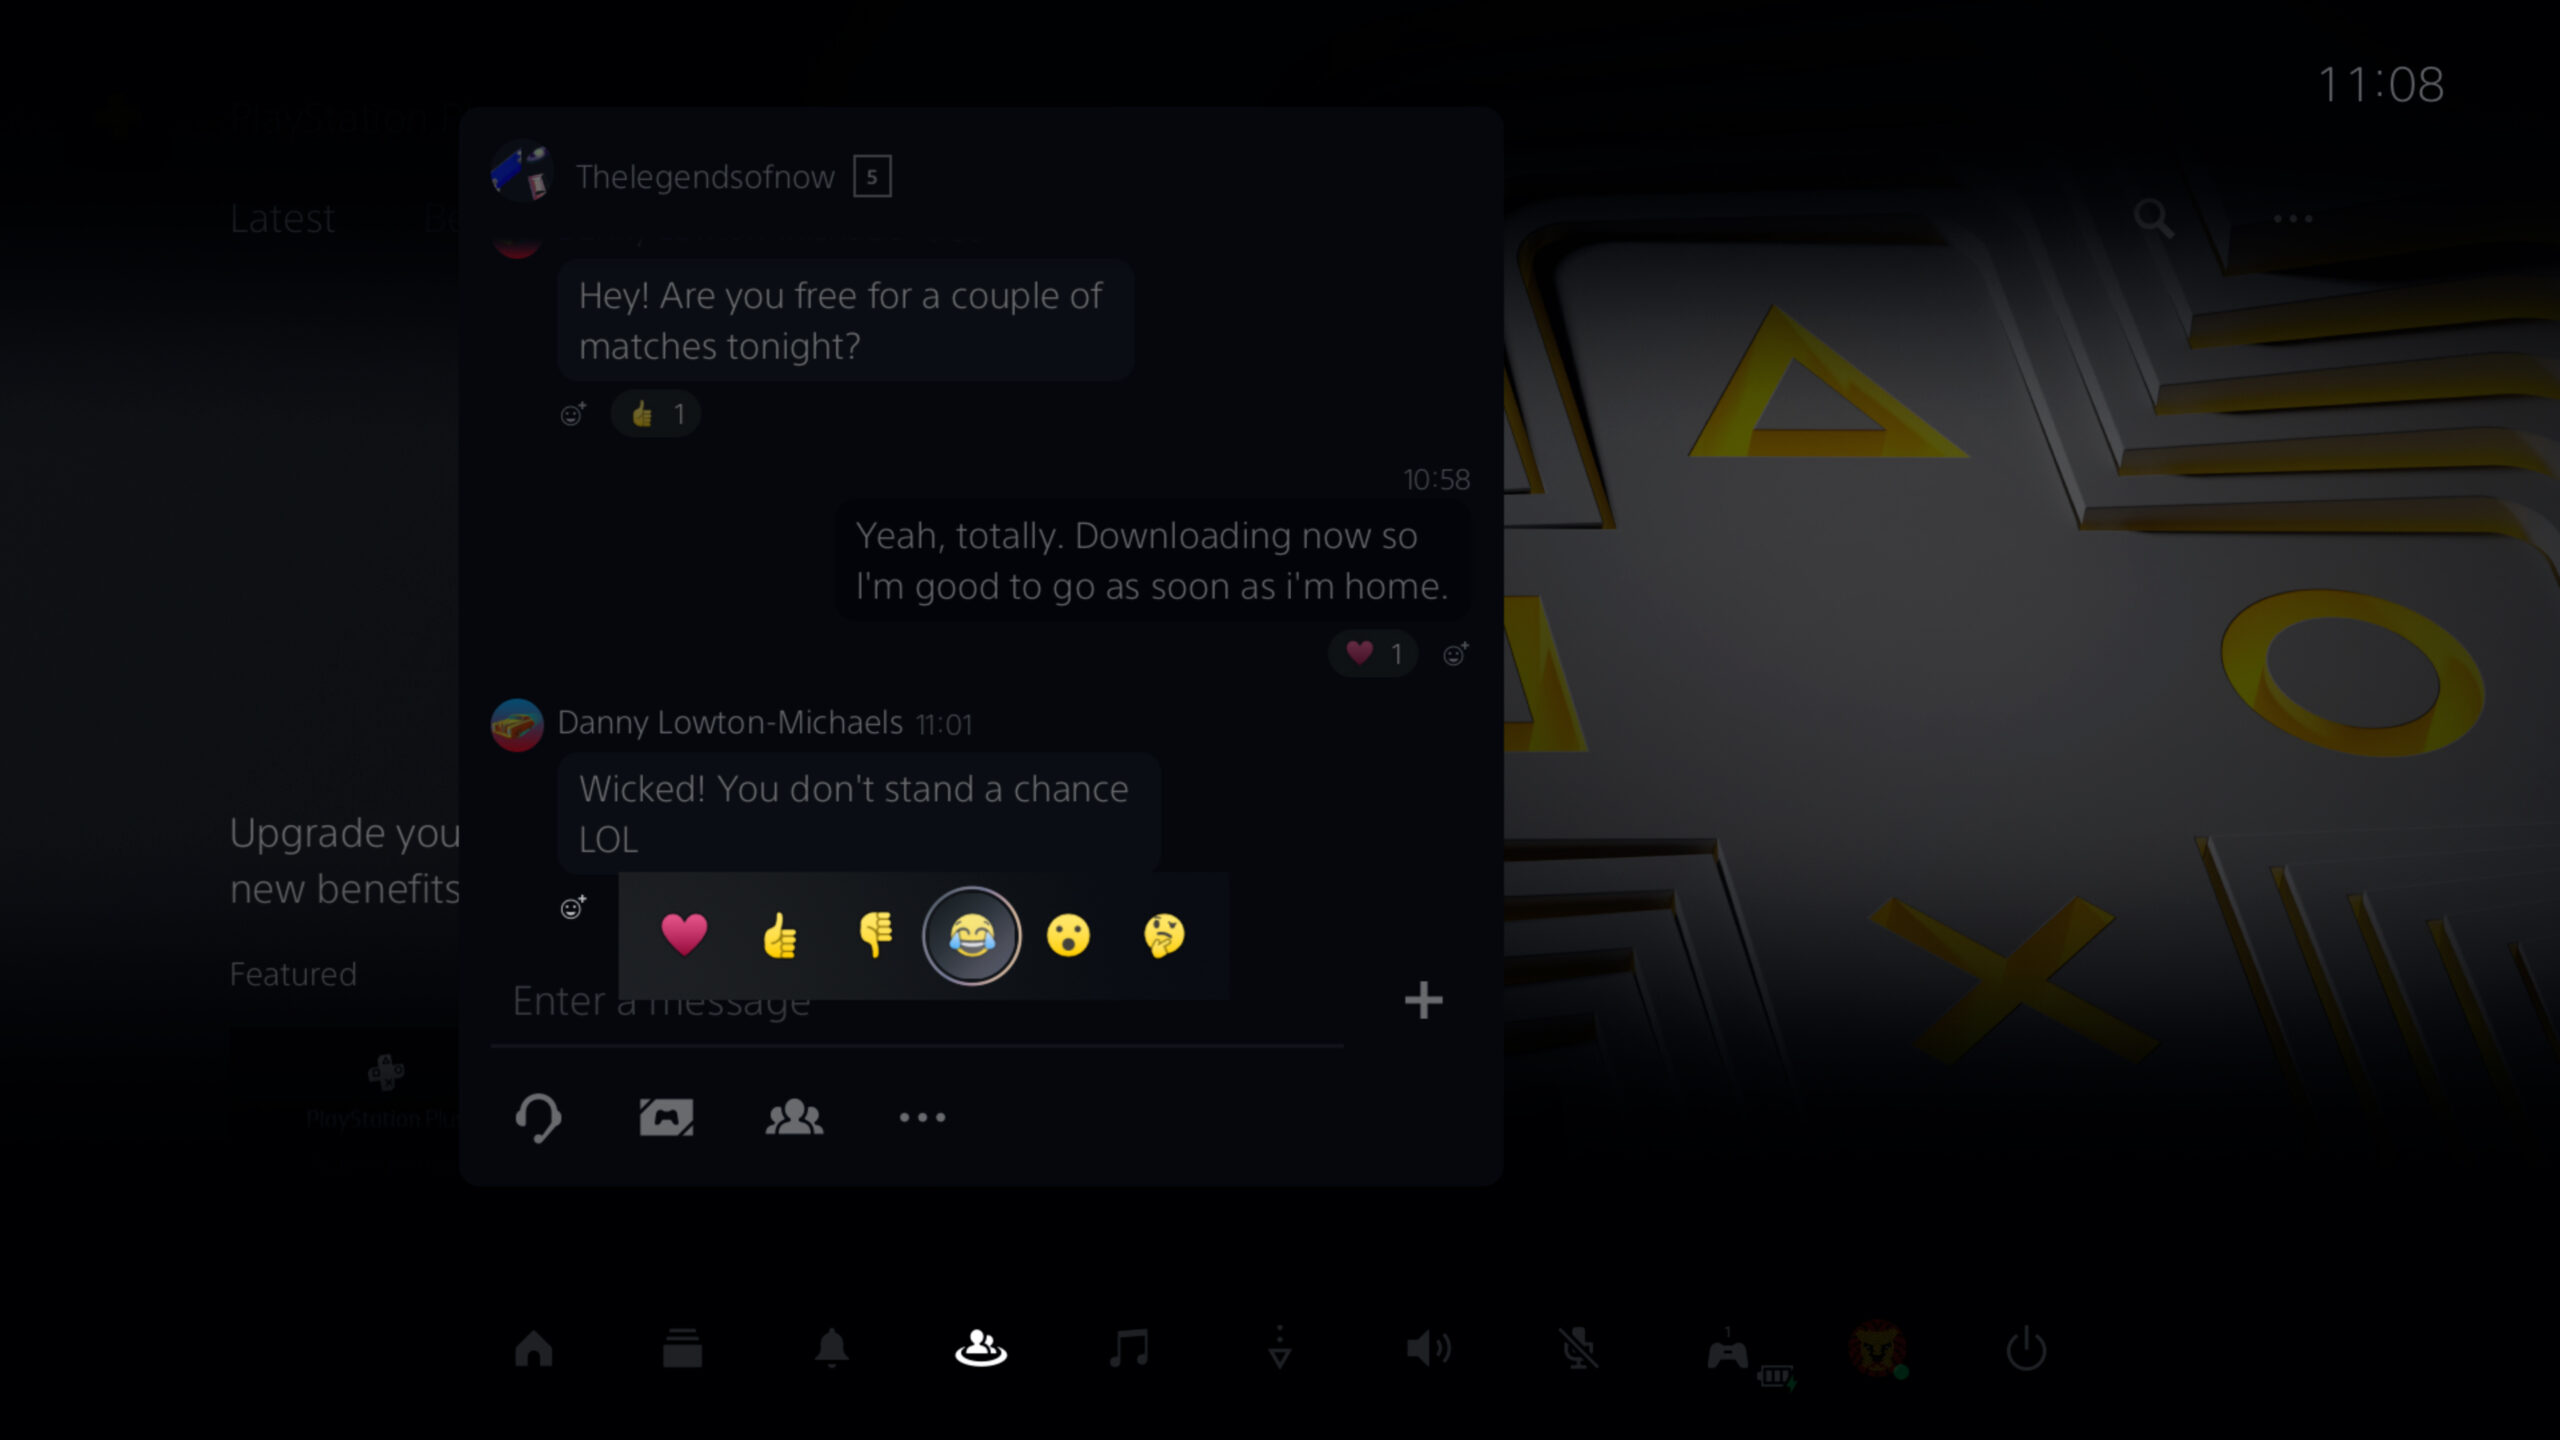  "PS5 UI screenshot of the message screen with emoji reaction options"